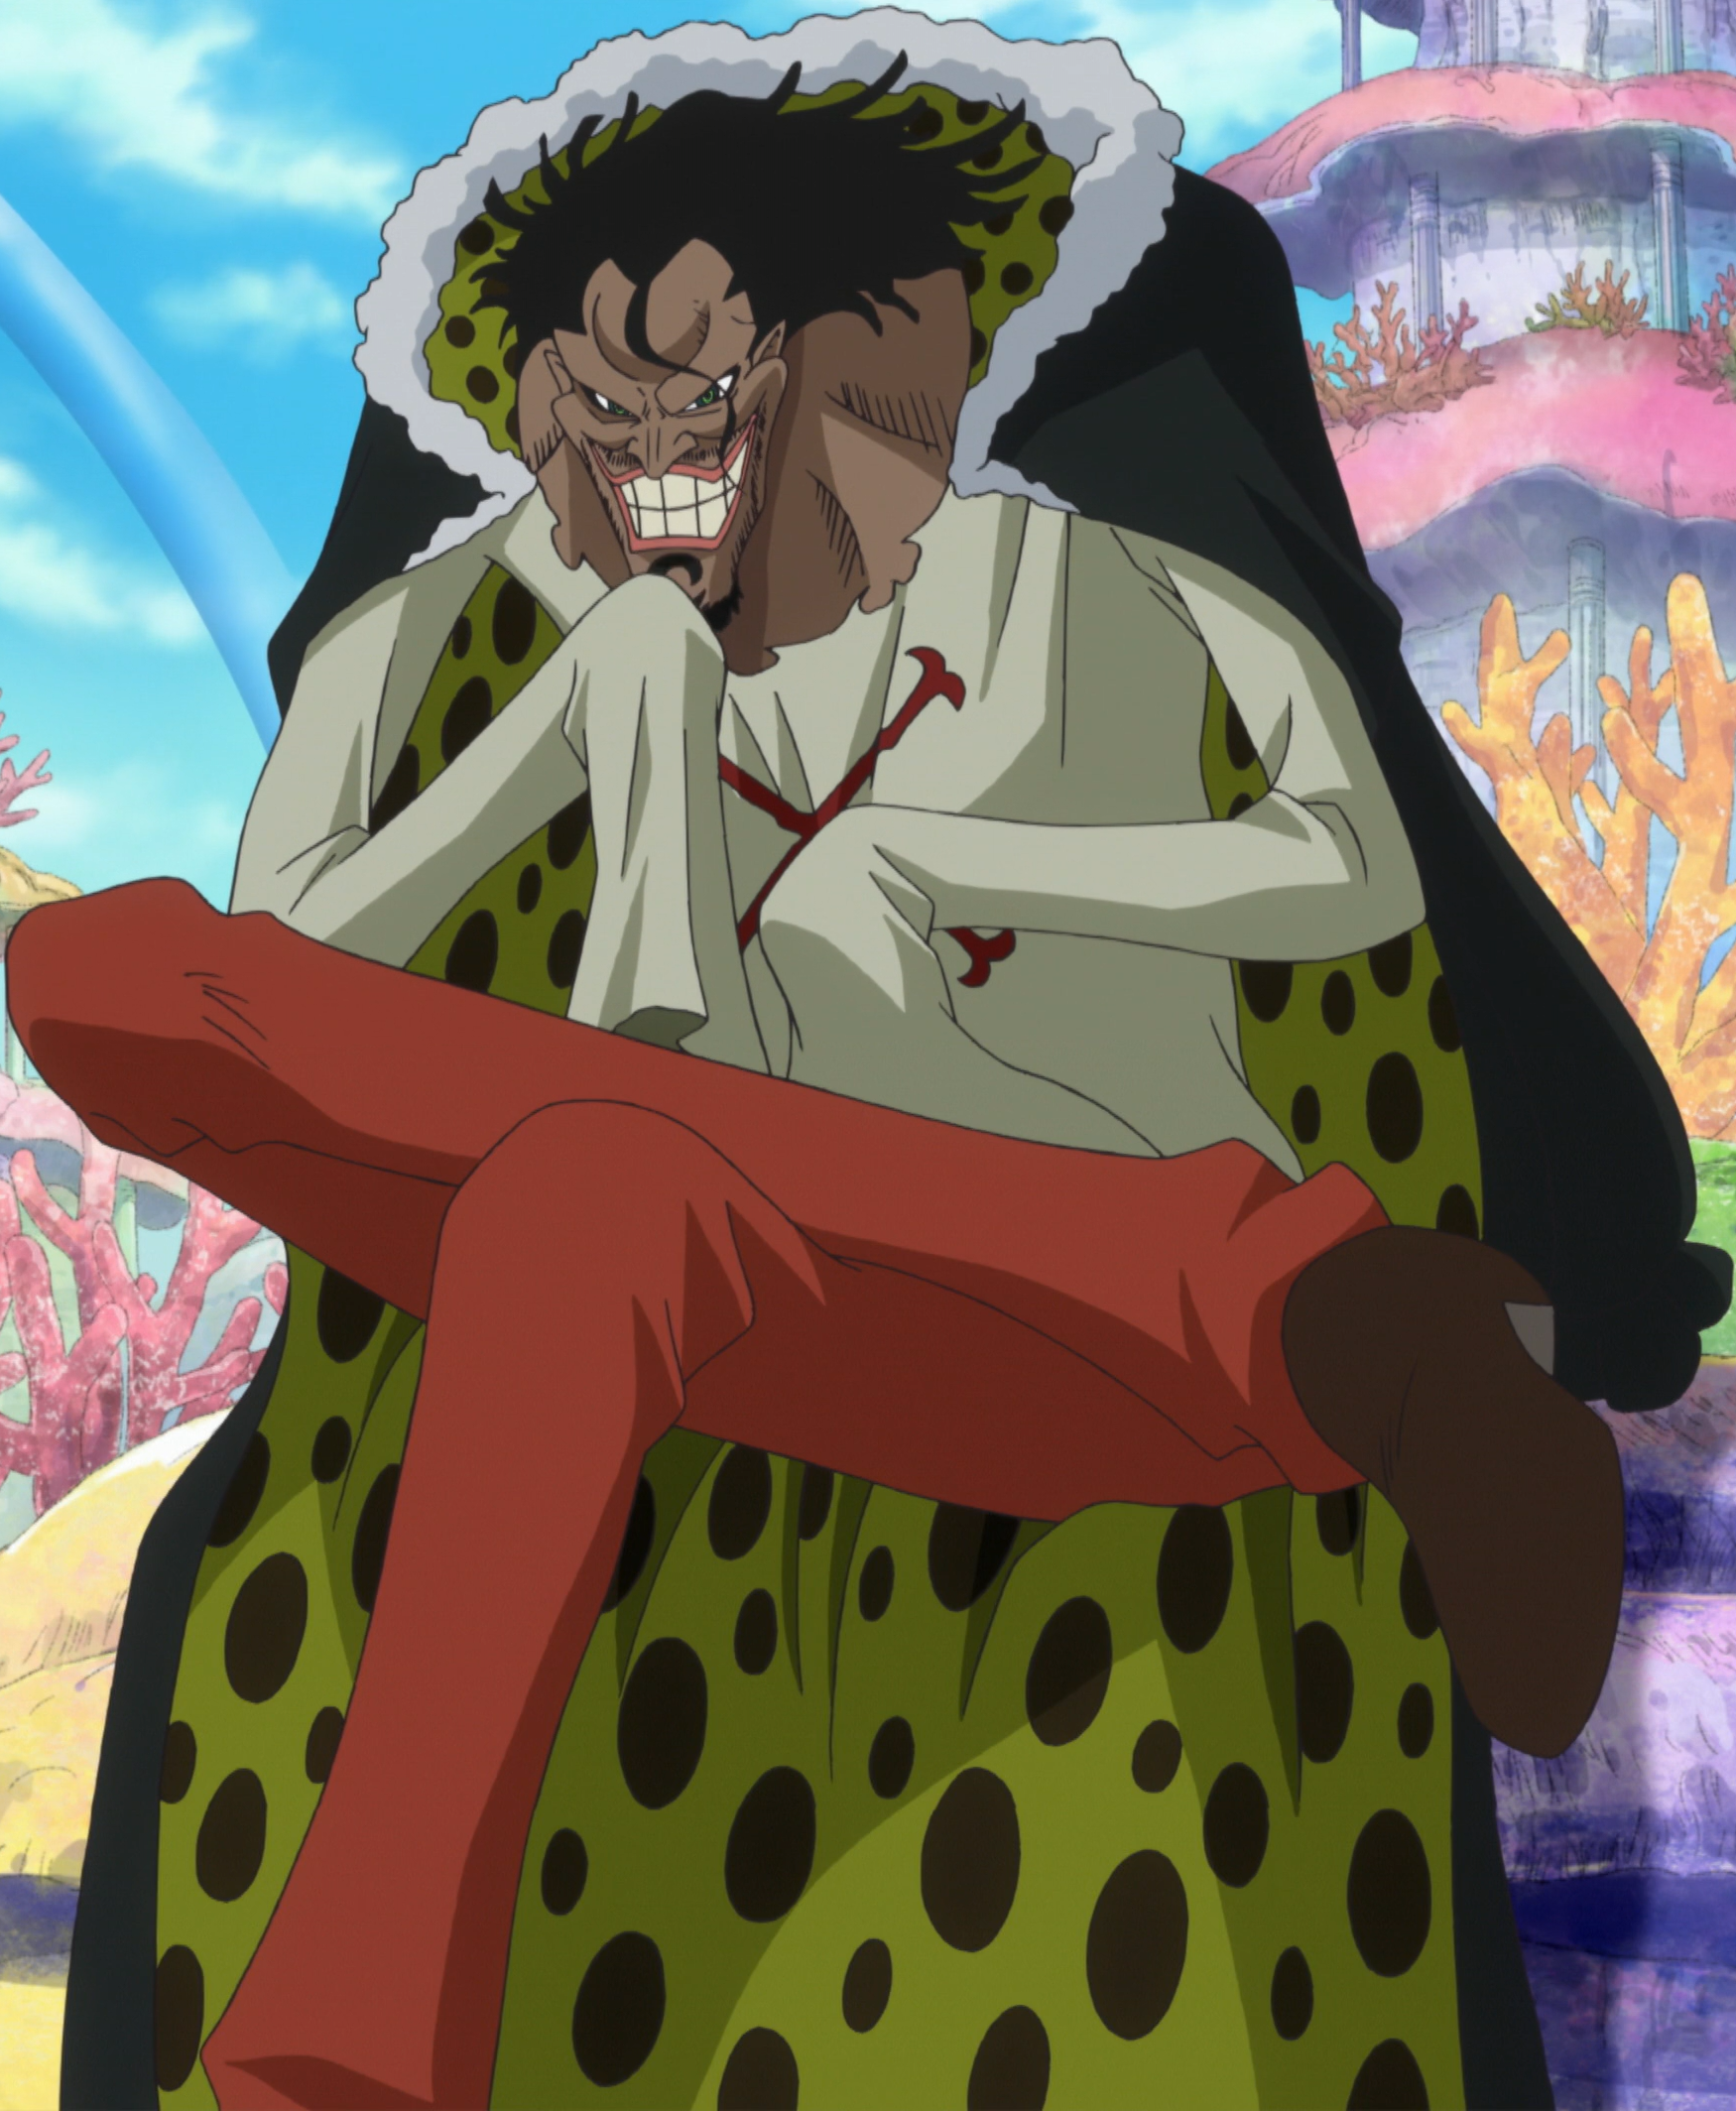 THE BIGGEST CRIME COMMITTED IN ONE PIECE